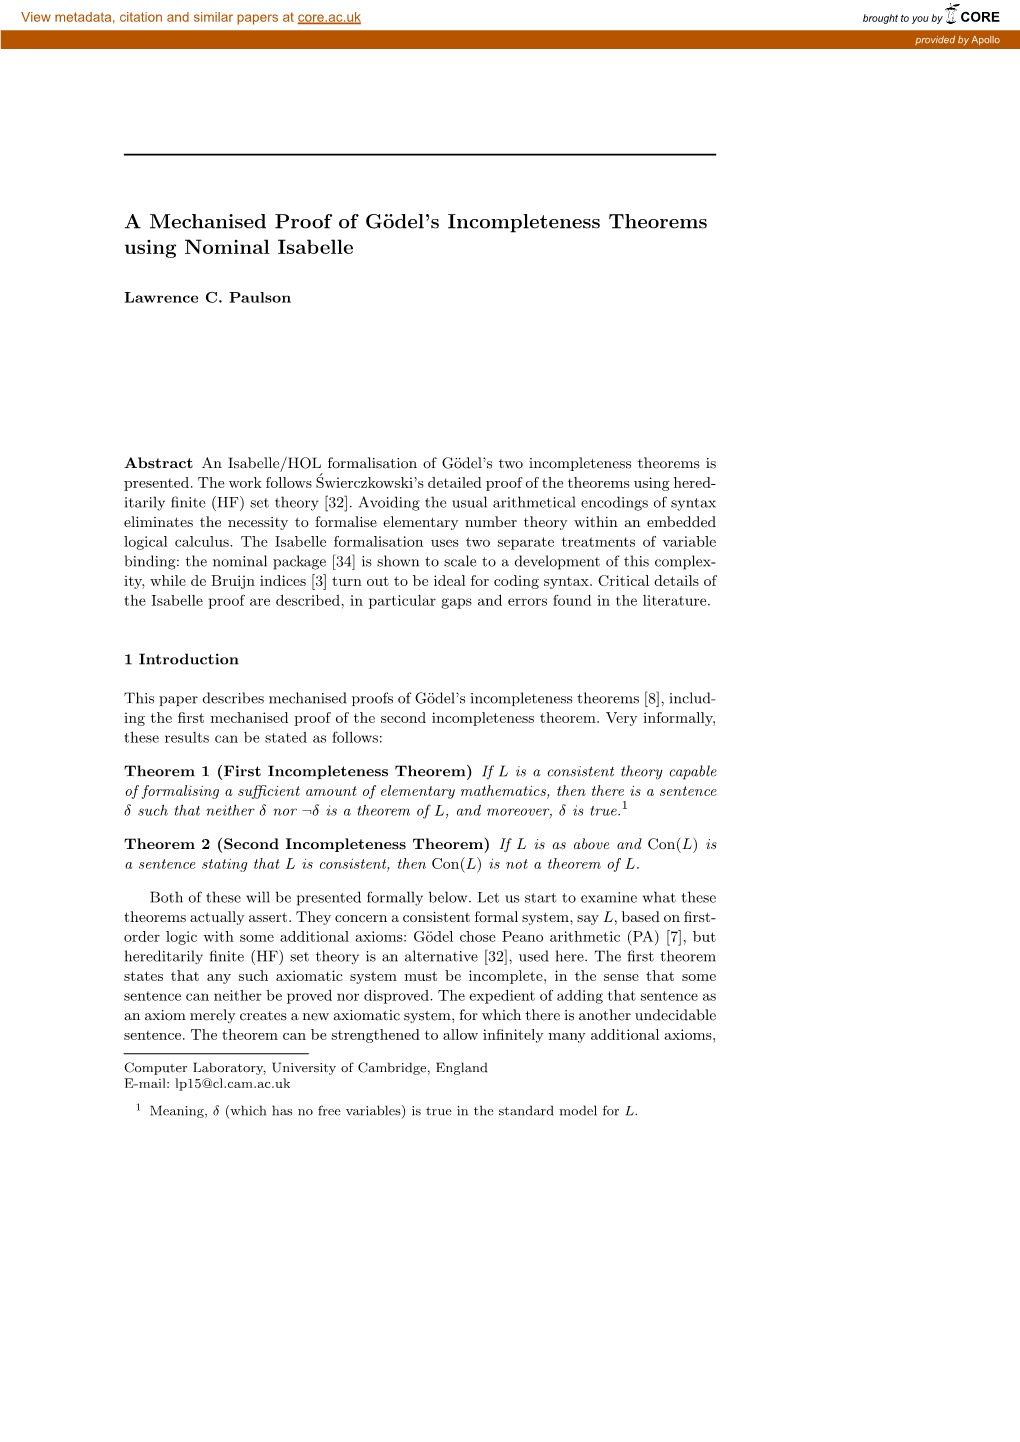 A Mechanised Proof of Gödel's Incompleteness Theorems Using